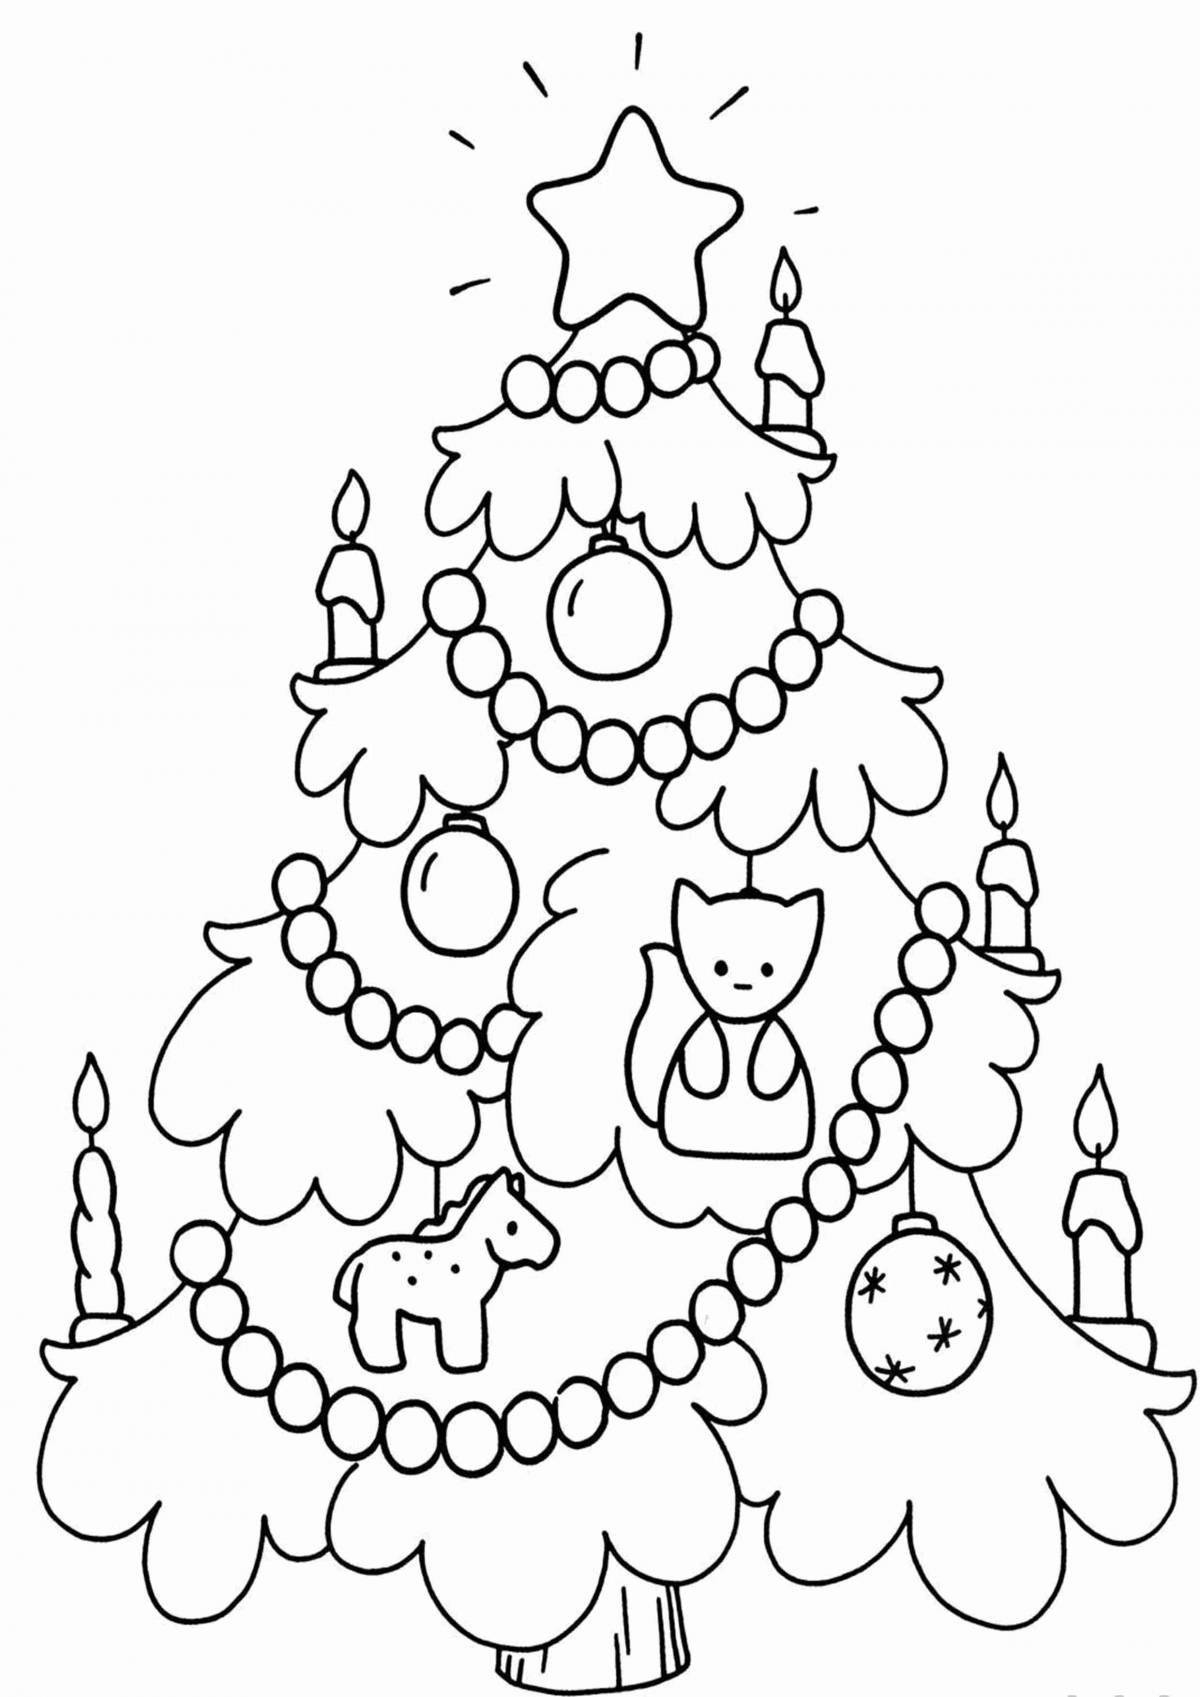 Exciting Christmas tree coloring book for kids